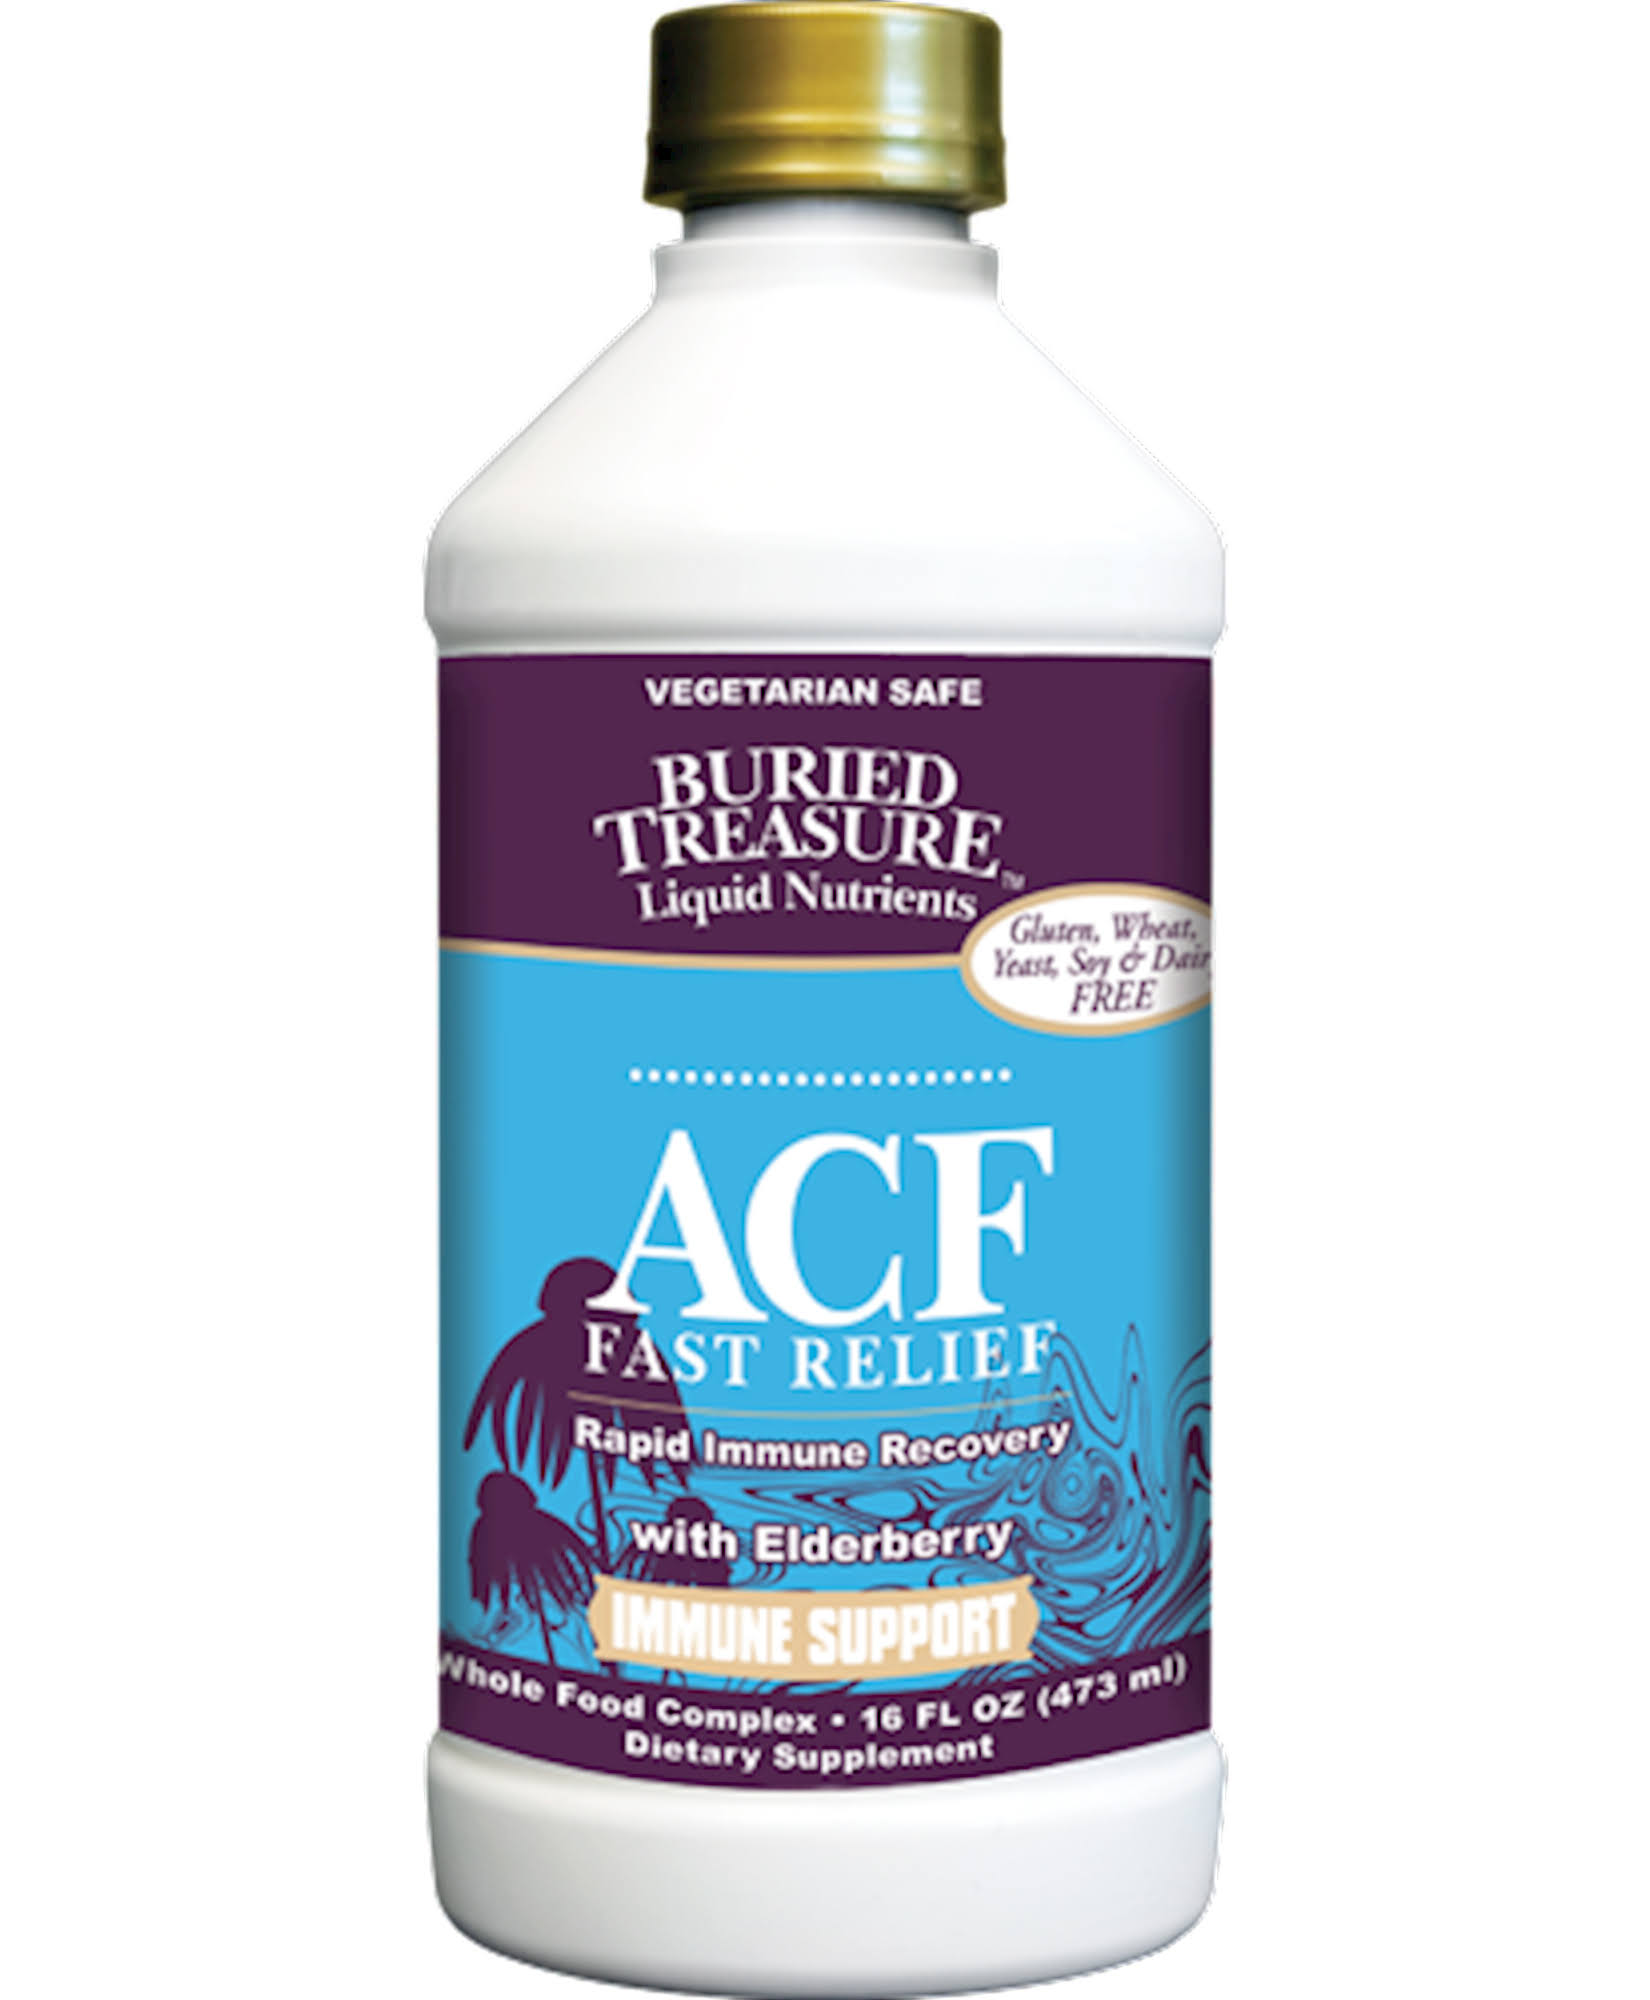 Buried Treasure Ace Fast Relief Rapid Immune Recovery